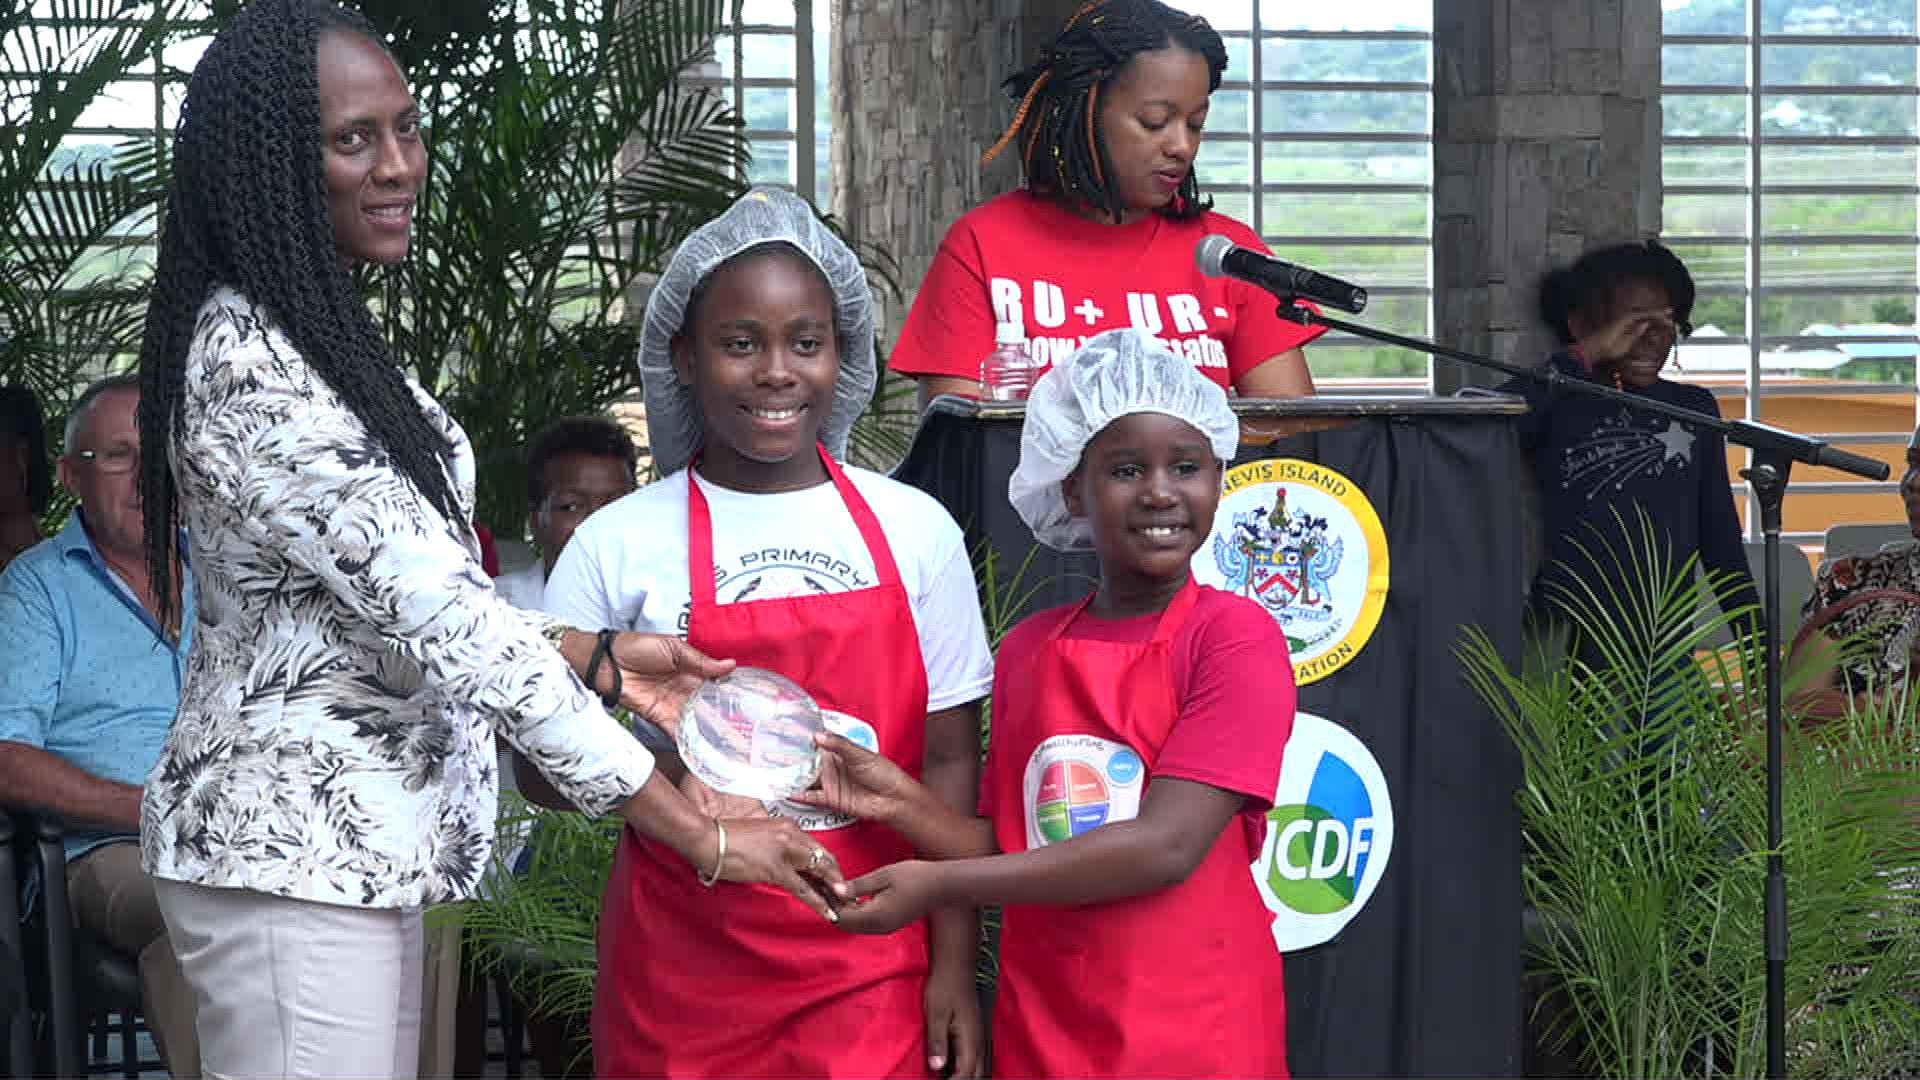 Mrs. Shelisa Martin-Clarke Acting Permanent Secretary in the Ministry of Health presents a trophy to joint 1st place winners in the MyHealthyPlate Junior Chef Competition, to Ms. La-Taivia Powell and Ms. Alicia Wallace of the St. James Primary School, at the Nevis Performing Arts Centre courtyard on April 15, 2019